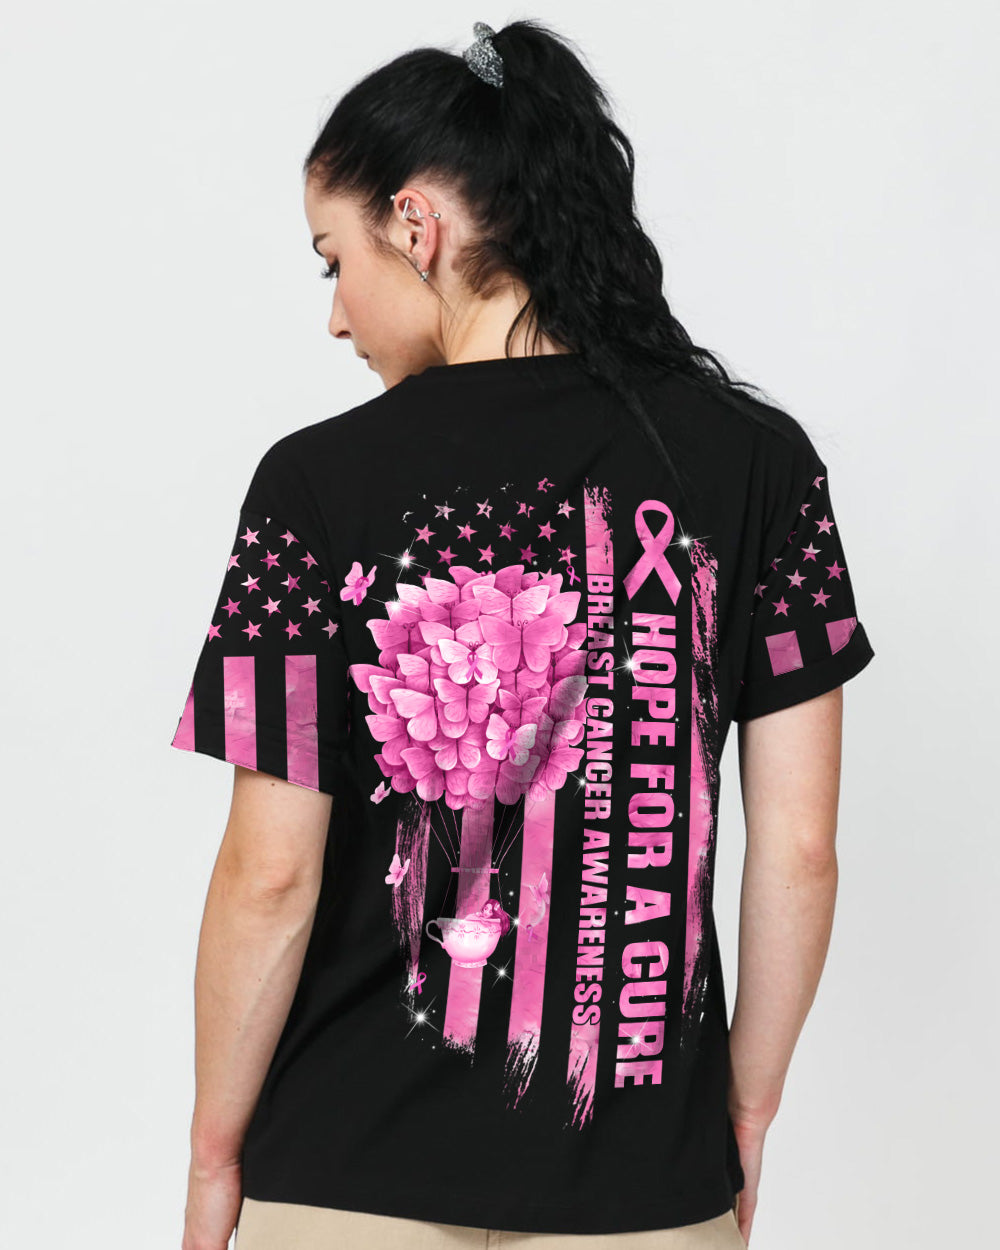 Hope For A Cure Butterfly Air Balloon Women's Breast Cancer Awareness Tshirt